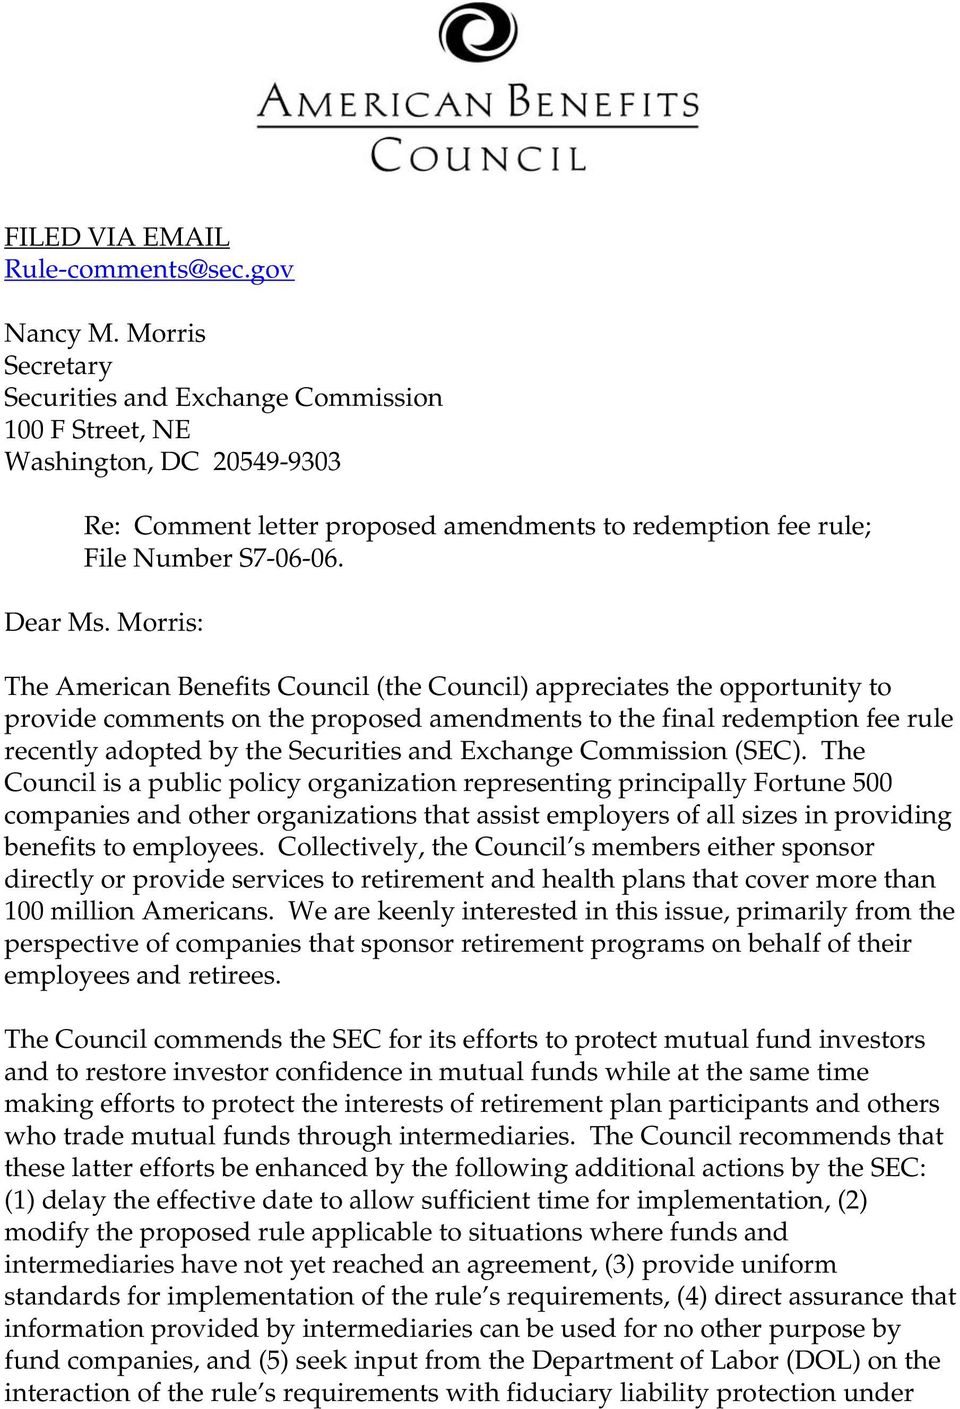 Morris: The American Benefits Council (the Council) appreciates the opportunity to provide comments on the proposed amendments to the final redemption fee rule recently adopted by the Securities and